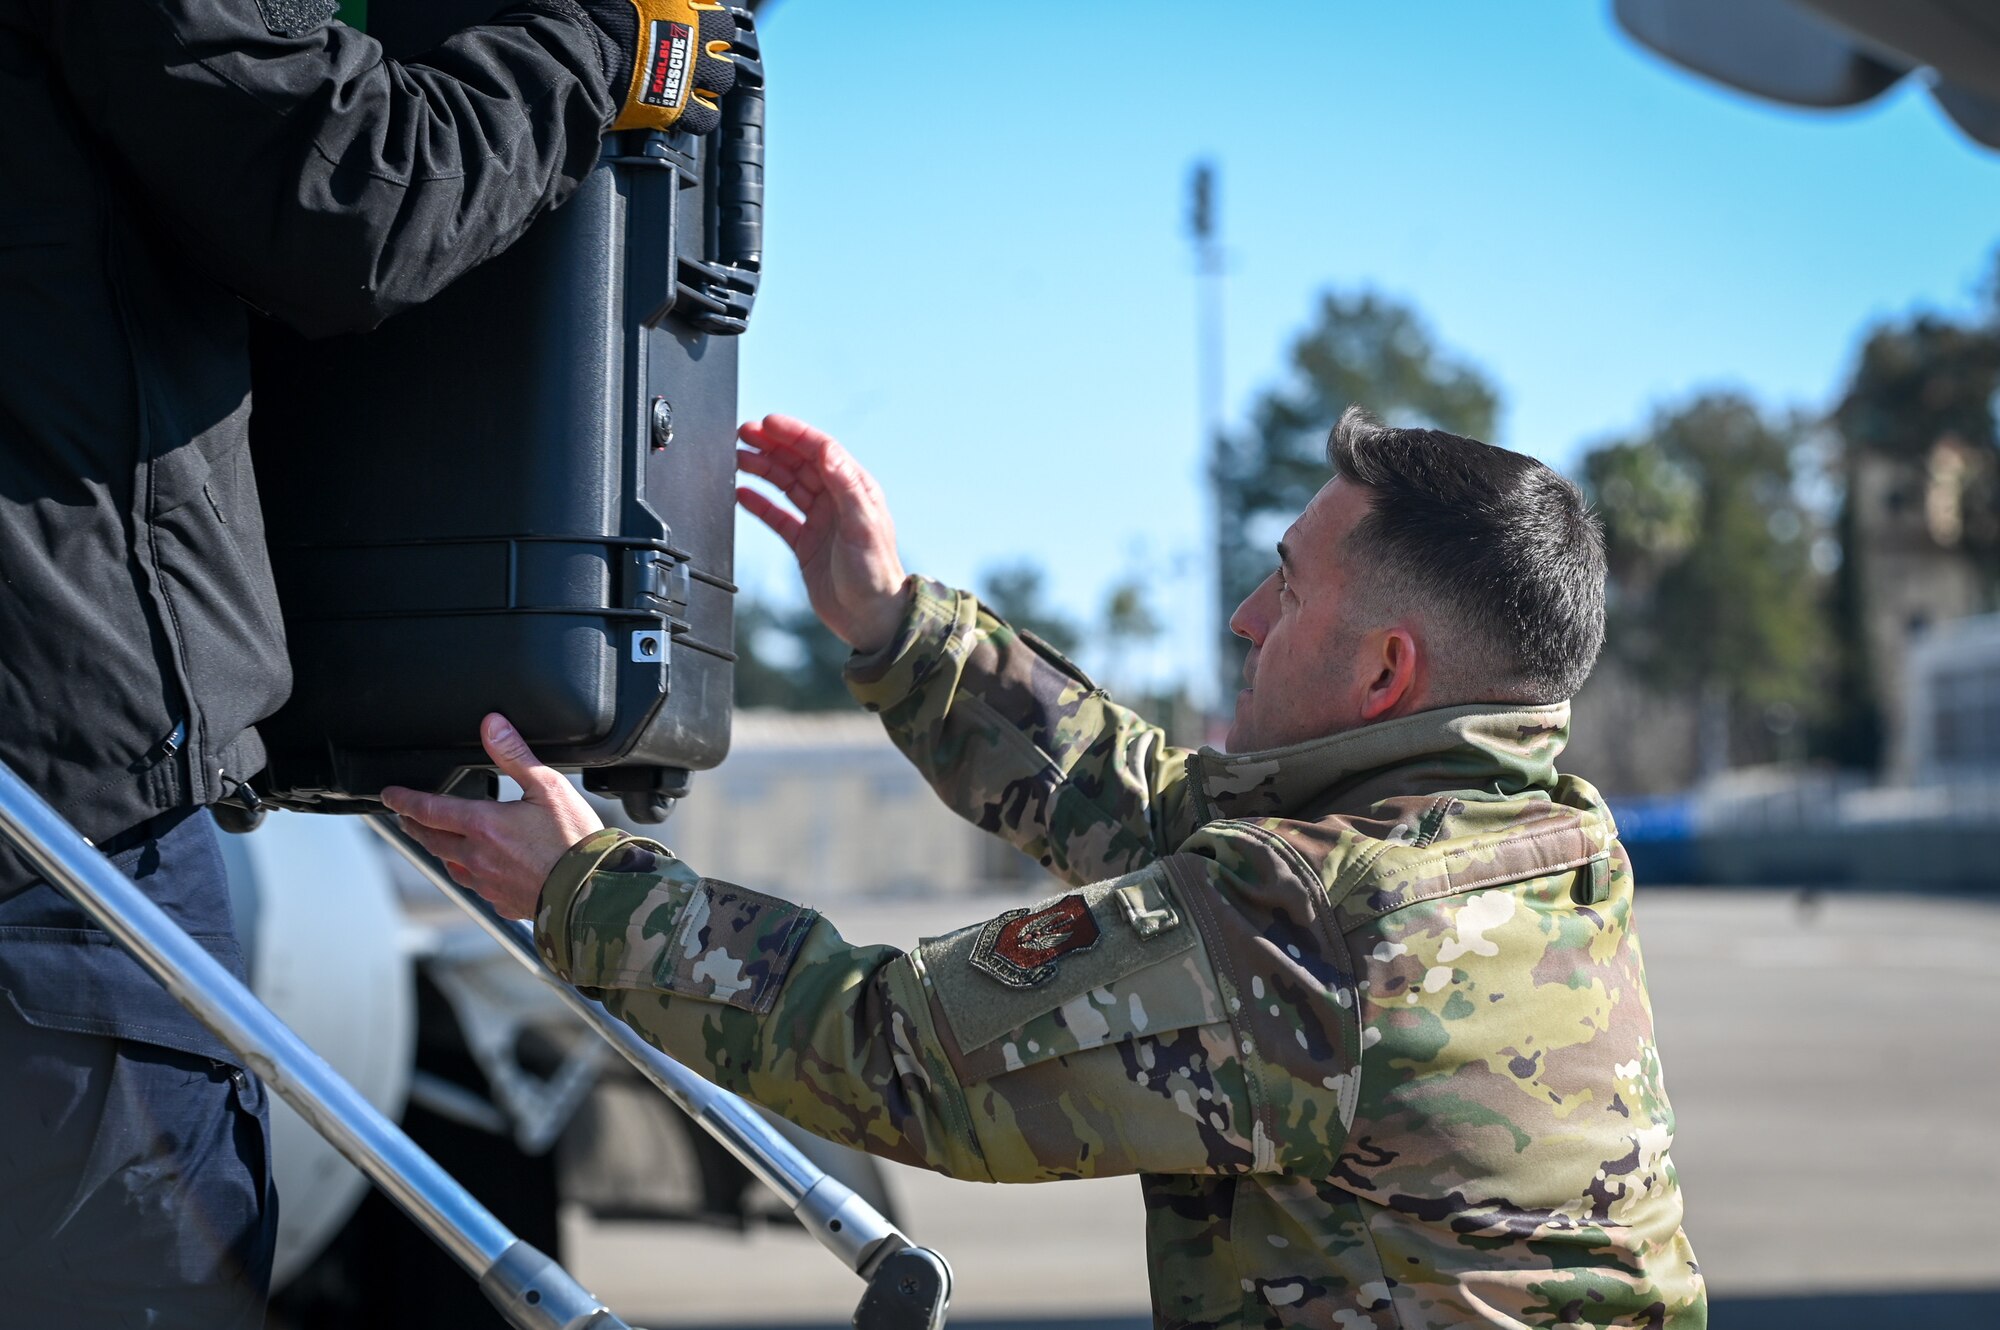 Chief Master Sgt. Justin Stoltzfus, 39th Air Base Wing command chief, assists members of the United States Agency for International Development’s Disaster Assistance Response Team with unloading equipment at Incirlik Air Base, Türkiye, Feb. 8, 2023.